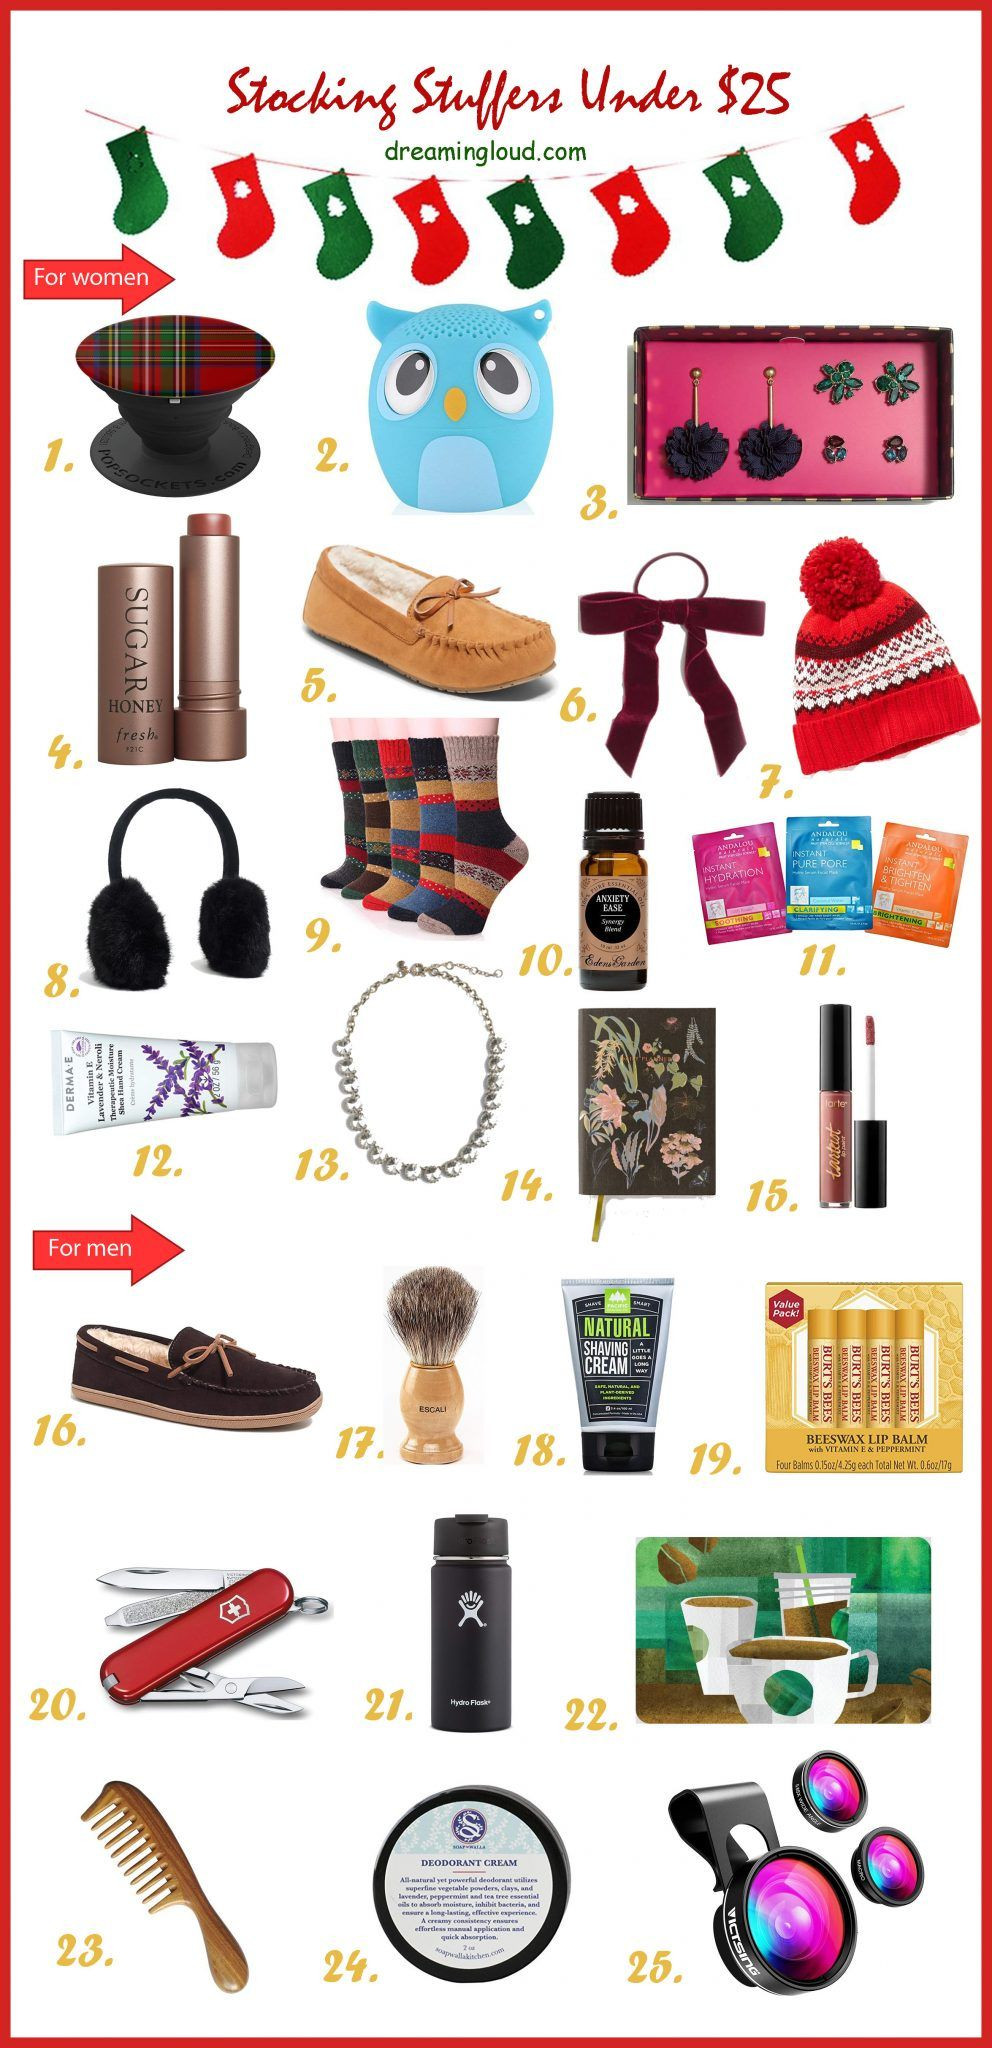 Christmas Gift Ideas For Him Under $25
 Top 25 Stocking Stuffers Ideas Under $25 for Him & Her